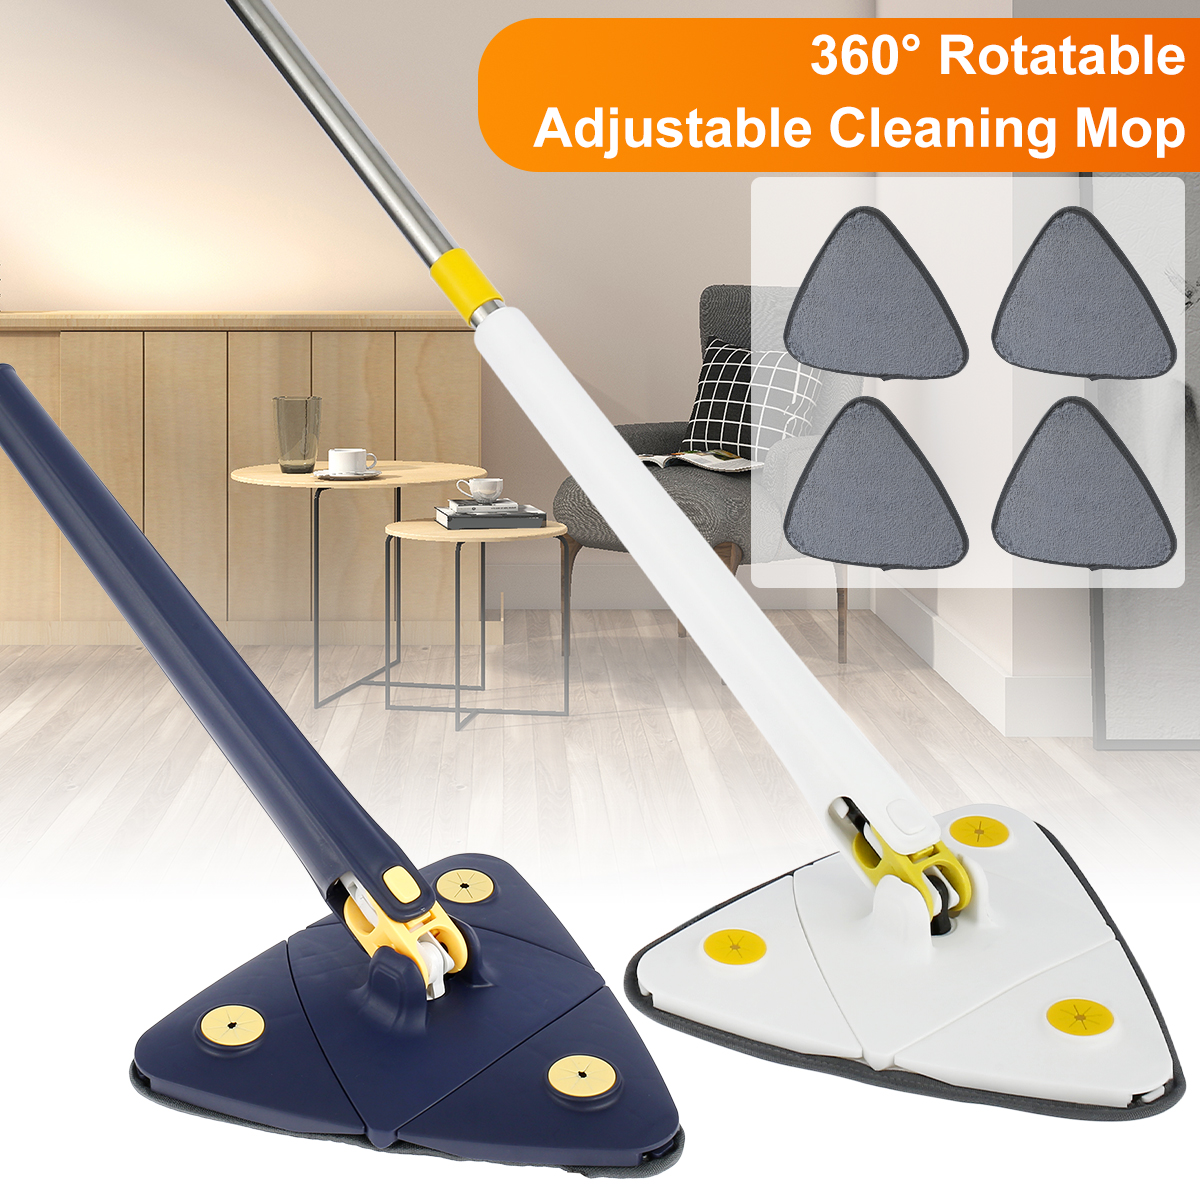 360° Degrees Rotatable Adjustable Cleaning Mop